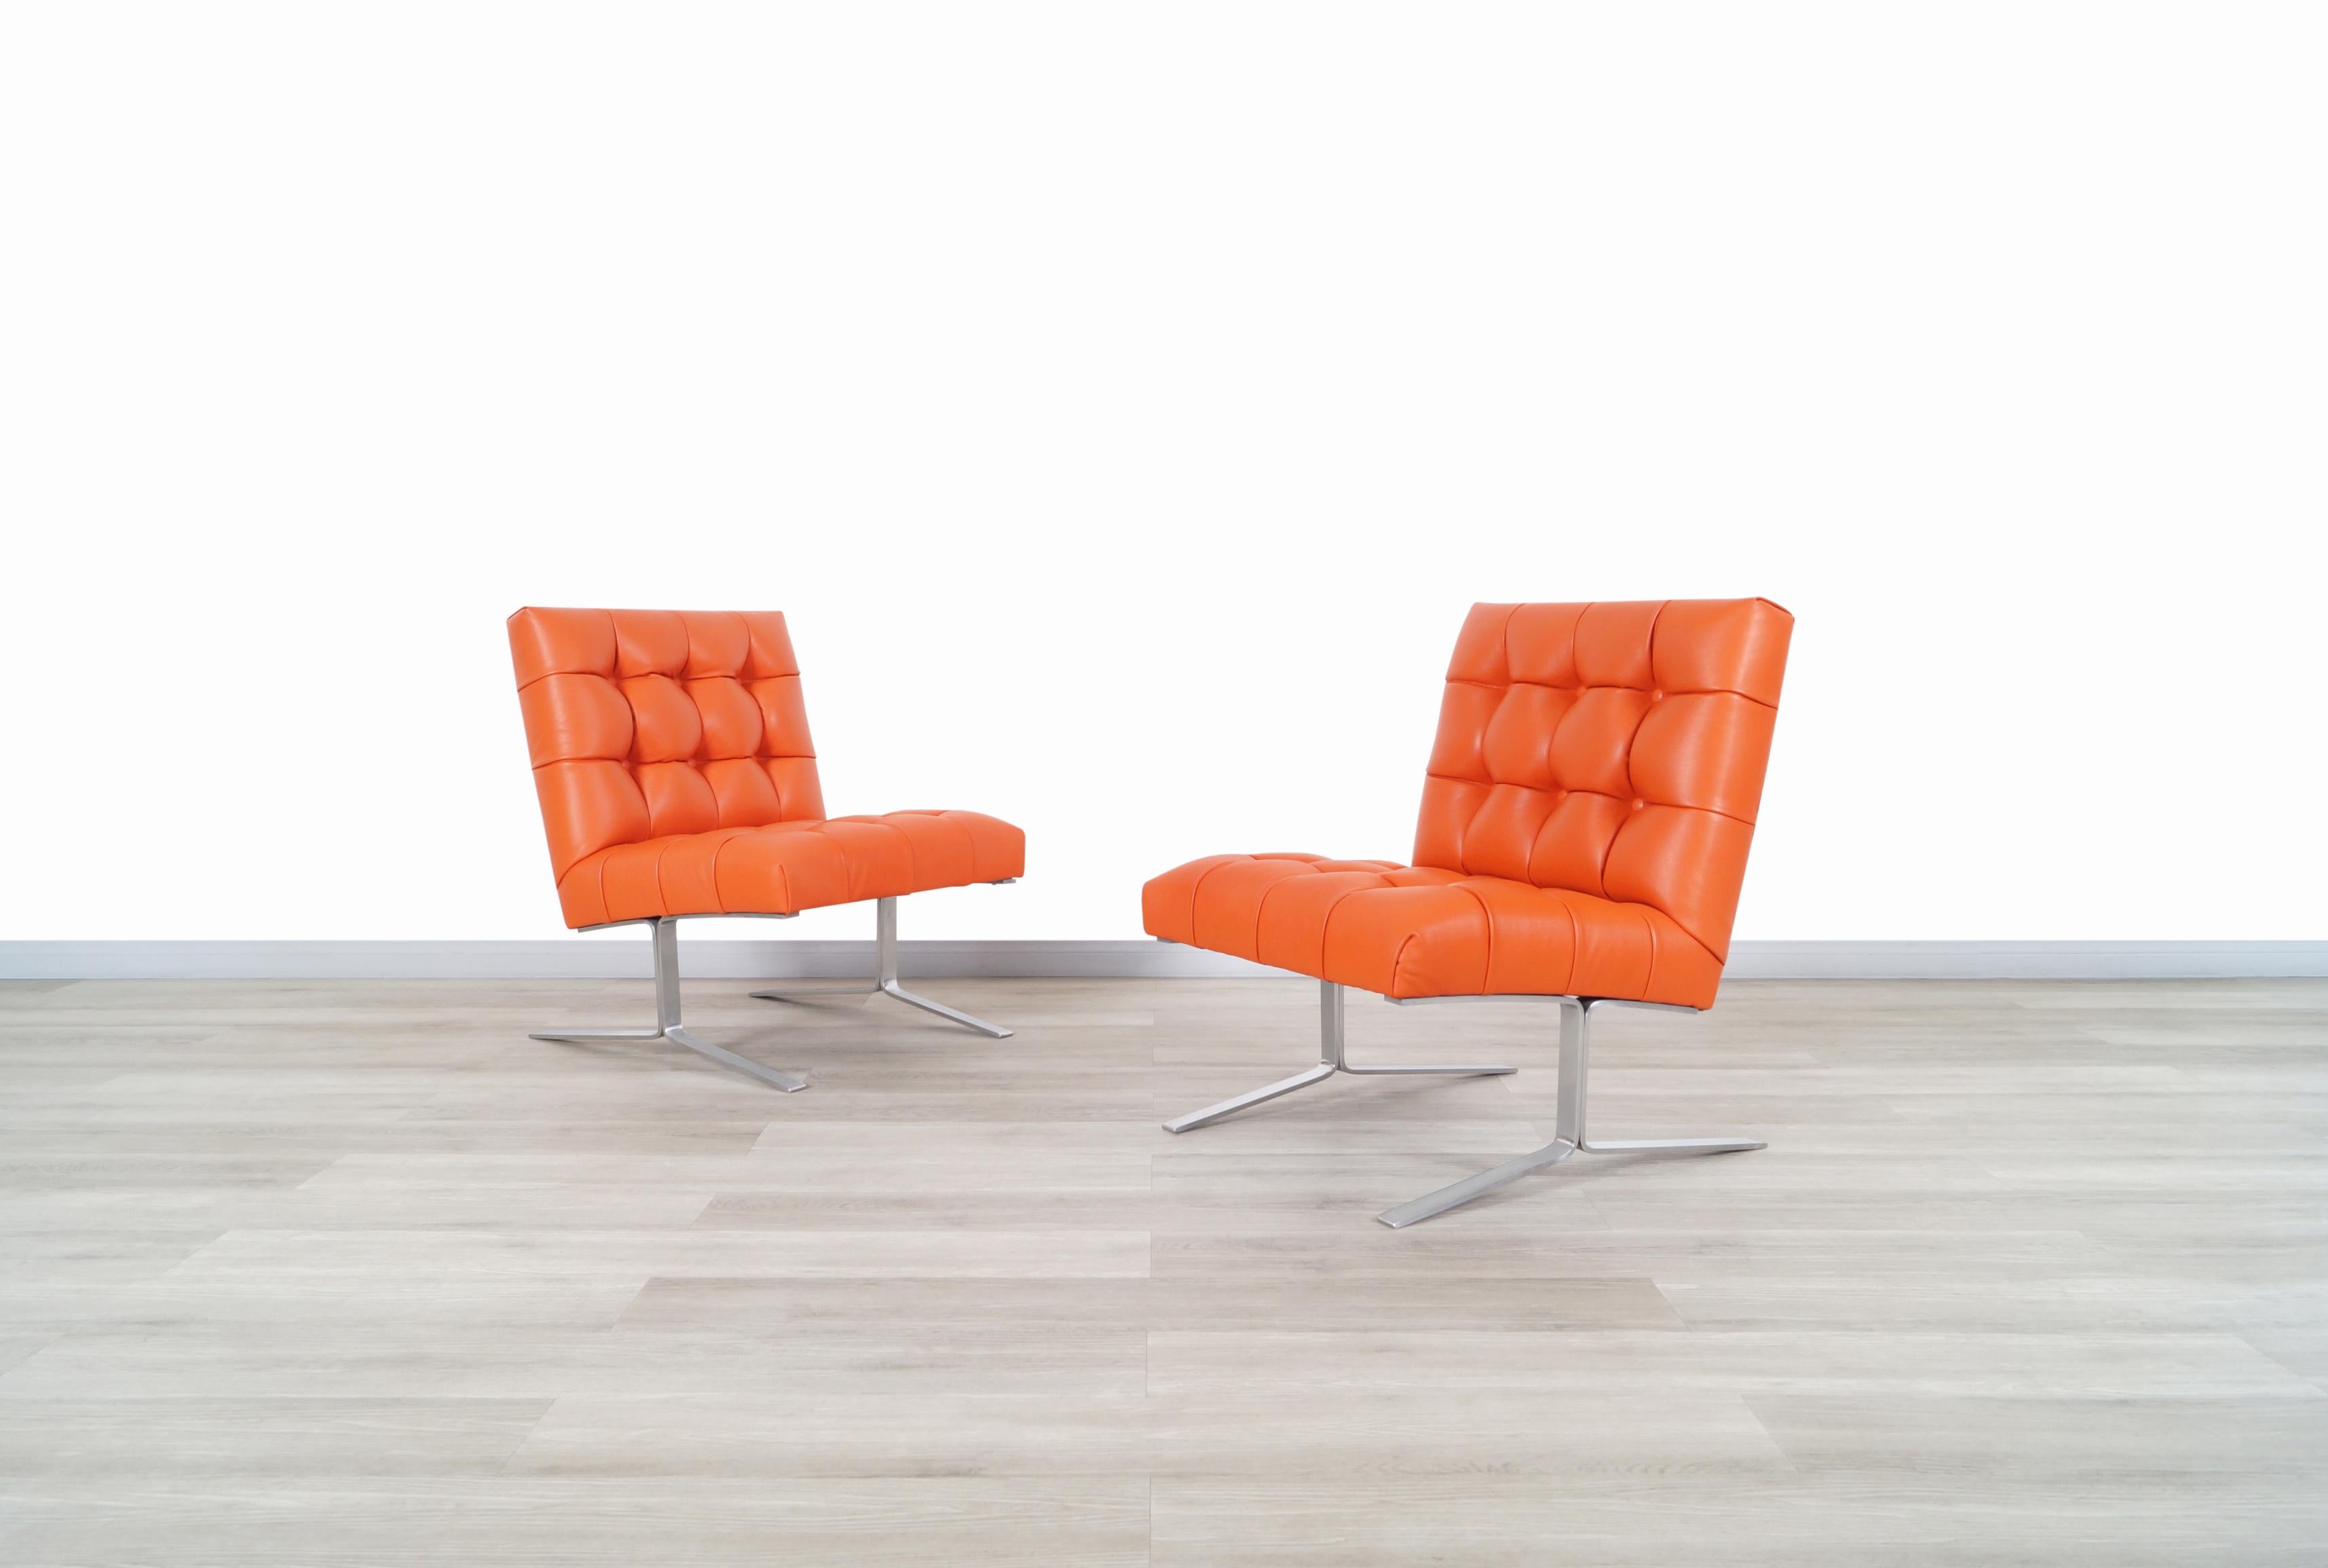 Fabulous vintage leather slipper lounge chairs in the manner of Ludwig Mies van der Rohe. These chairs have an innovative design in which their ergonomic structure stands out, offering a better rest when sitting. They’ve been professionally